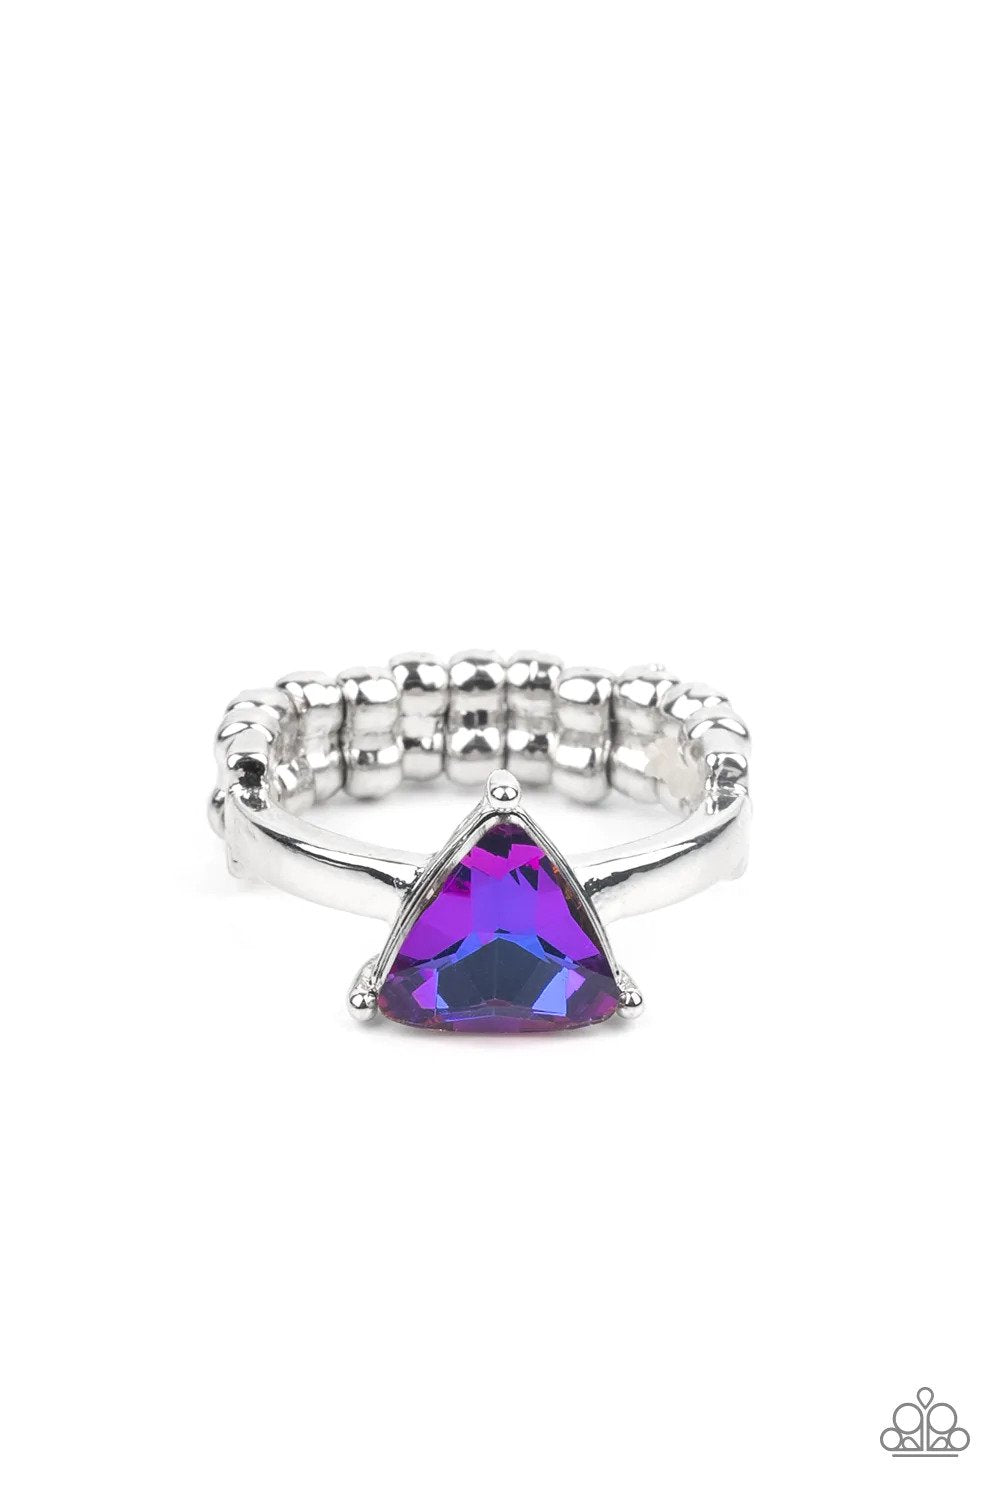 Tenacious Twinkle Multi Blue UV Shimmer Ring - Paparazzi Accessories- lightbox - CarasShop.com - $5 Jewelry by Cara Jewels